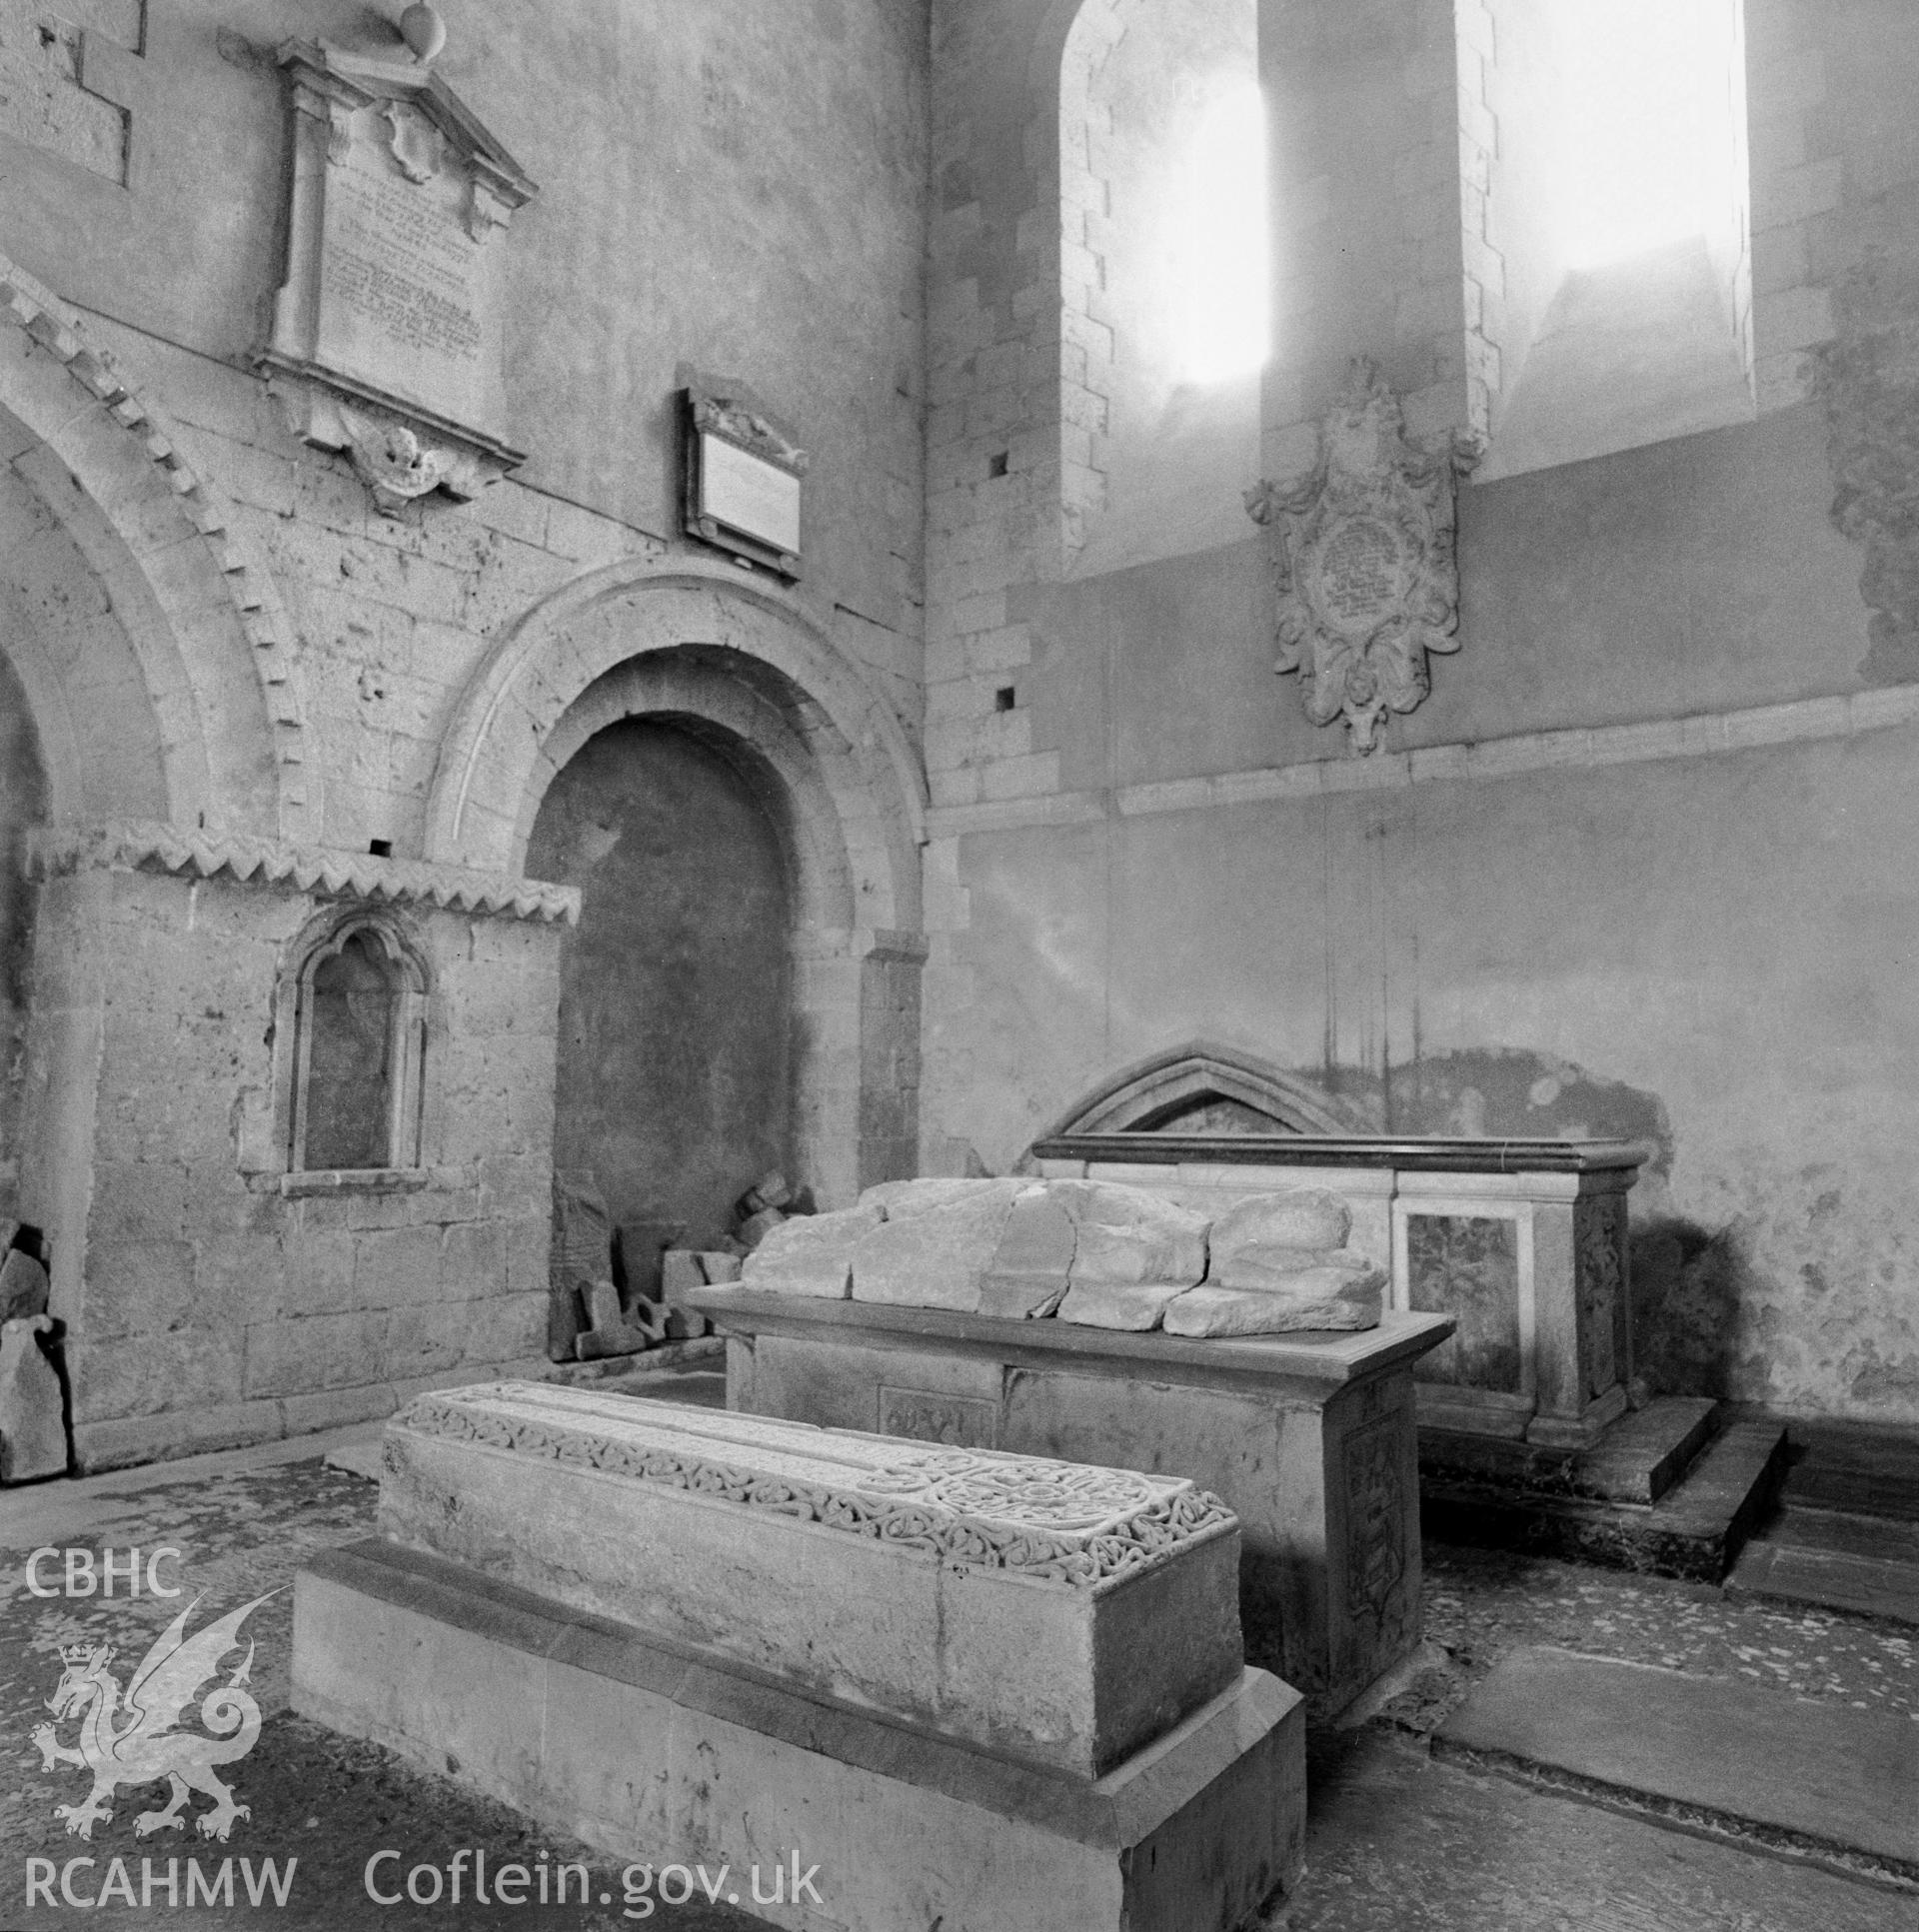 1 b/w print showing interior view of Ewenny Priory with tombstones; collated by the former Central Office of Information.